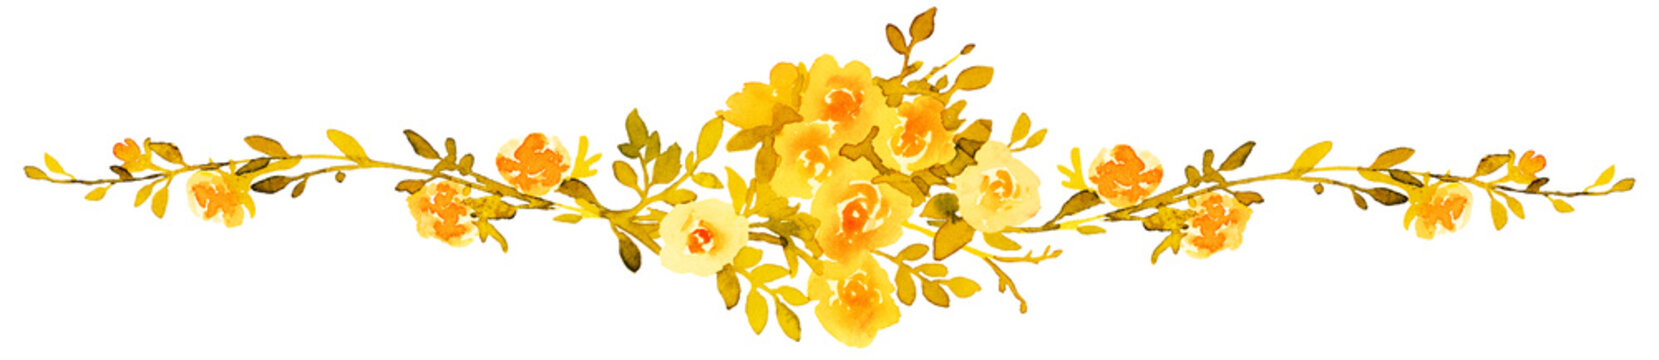 Vintage yellow gold roses composition. Watercolor illustration